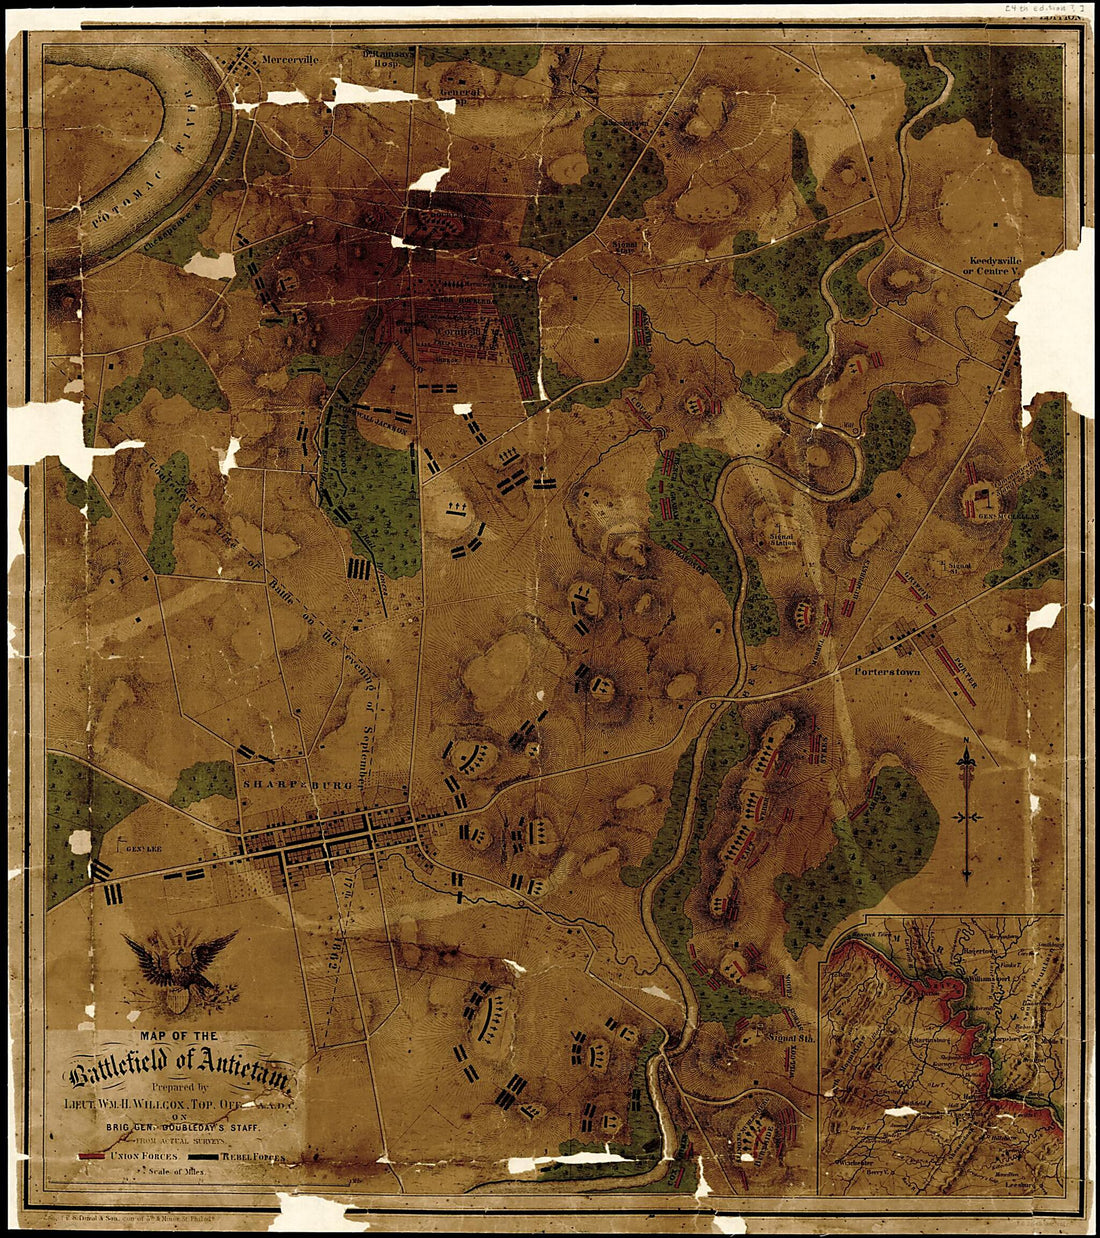 This old map of Map of the Battlefield of Antietam, Sept. 17, from 1862 was created by William H. Willcox in 1862